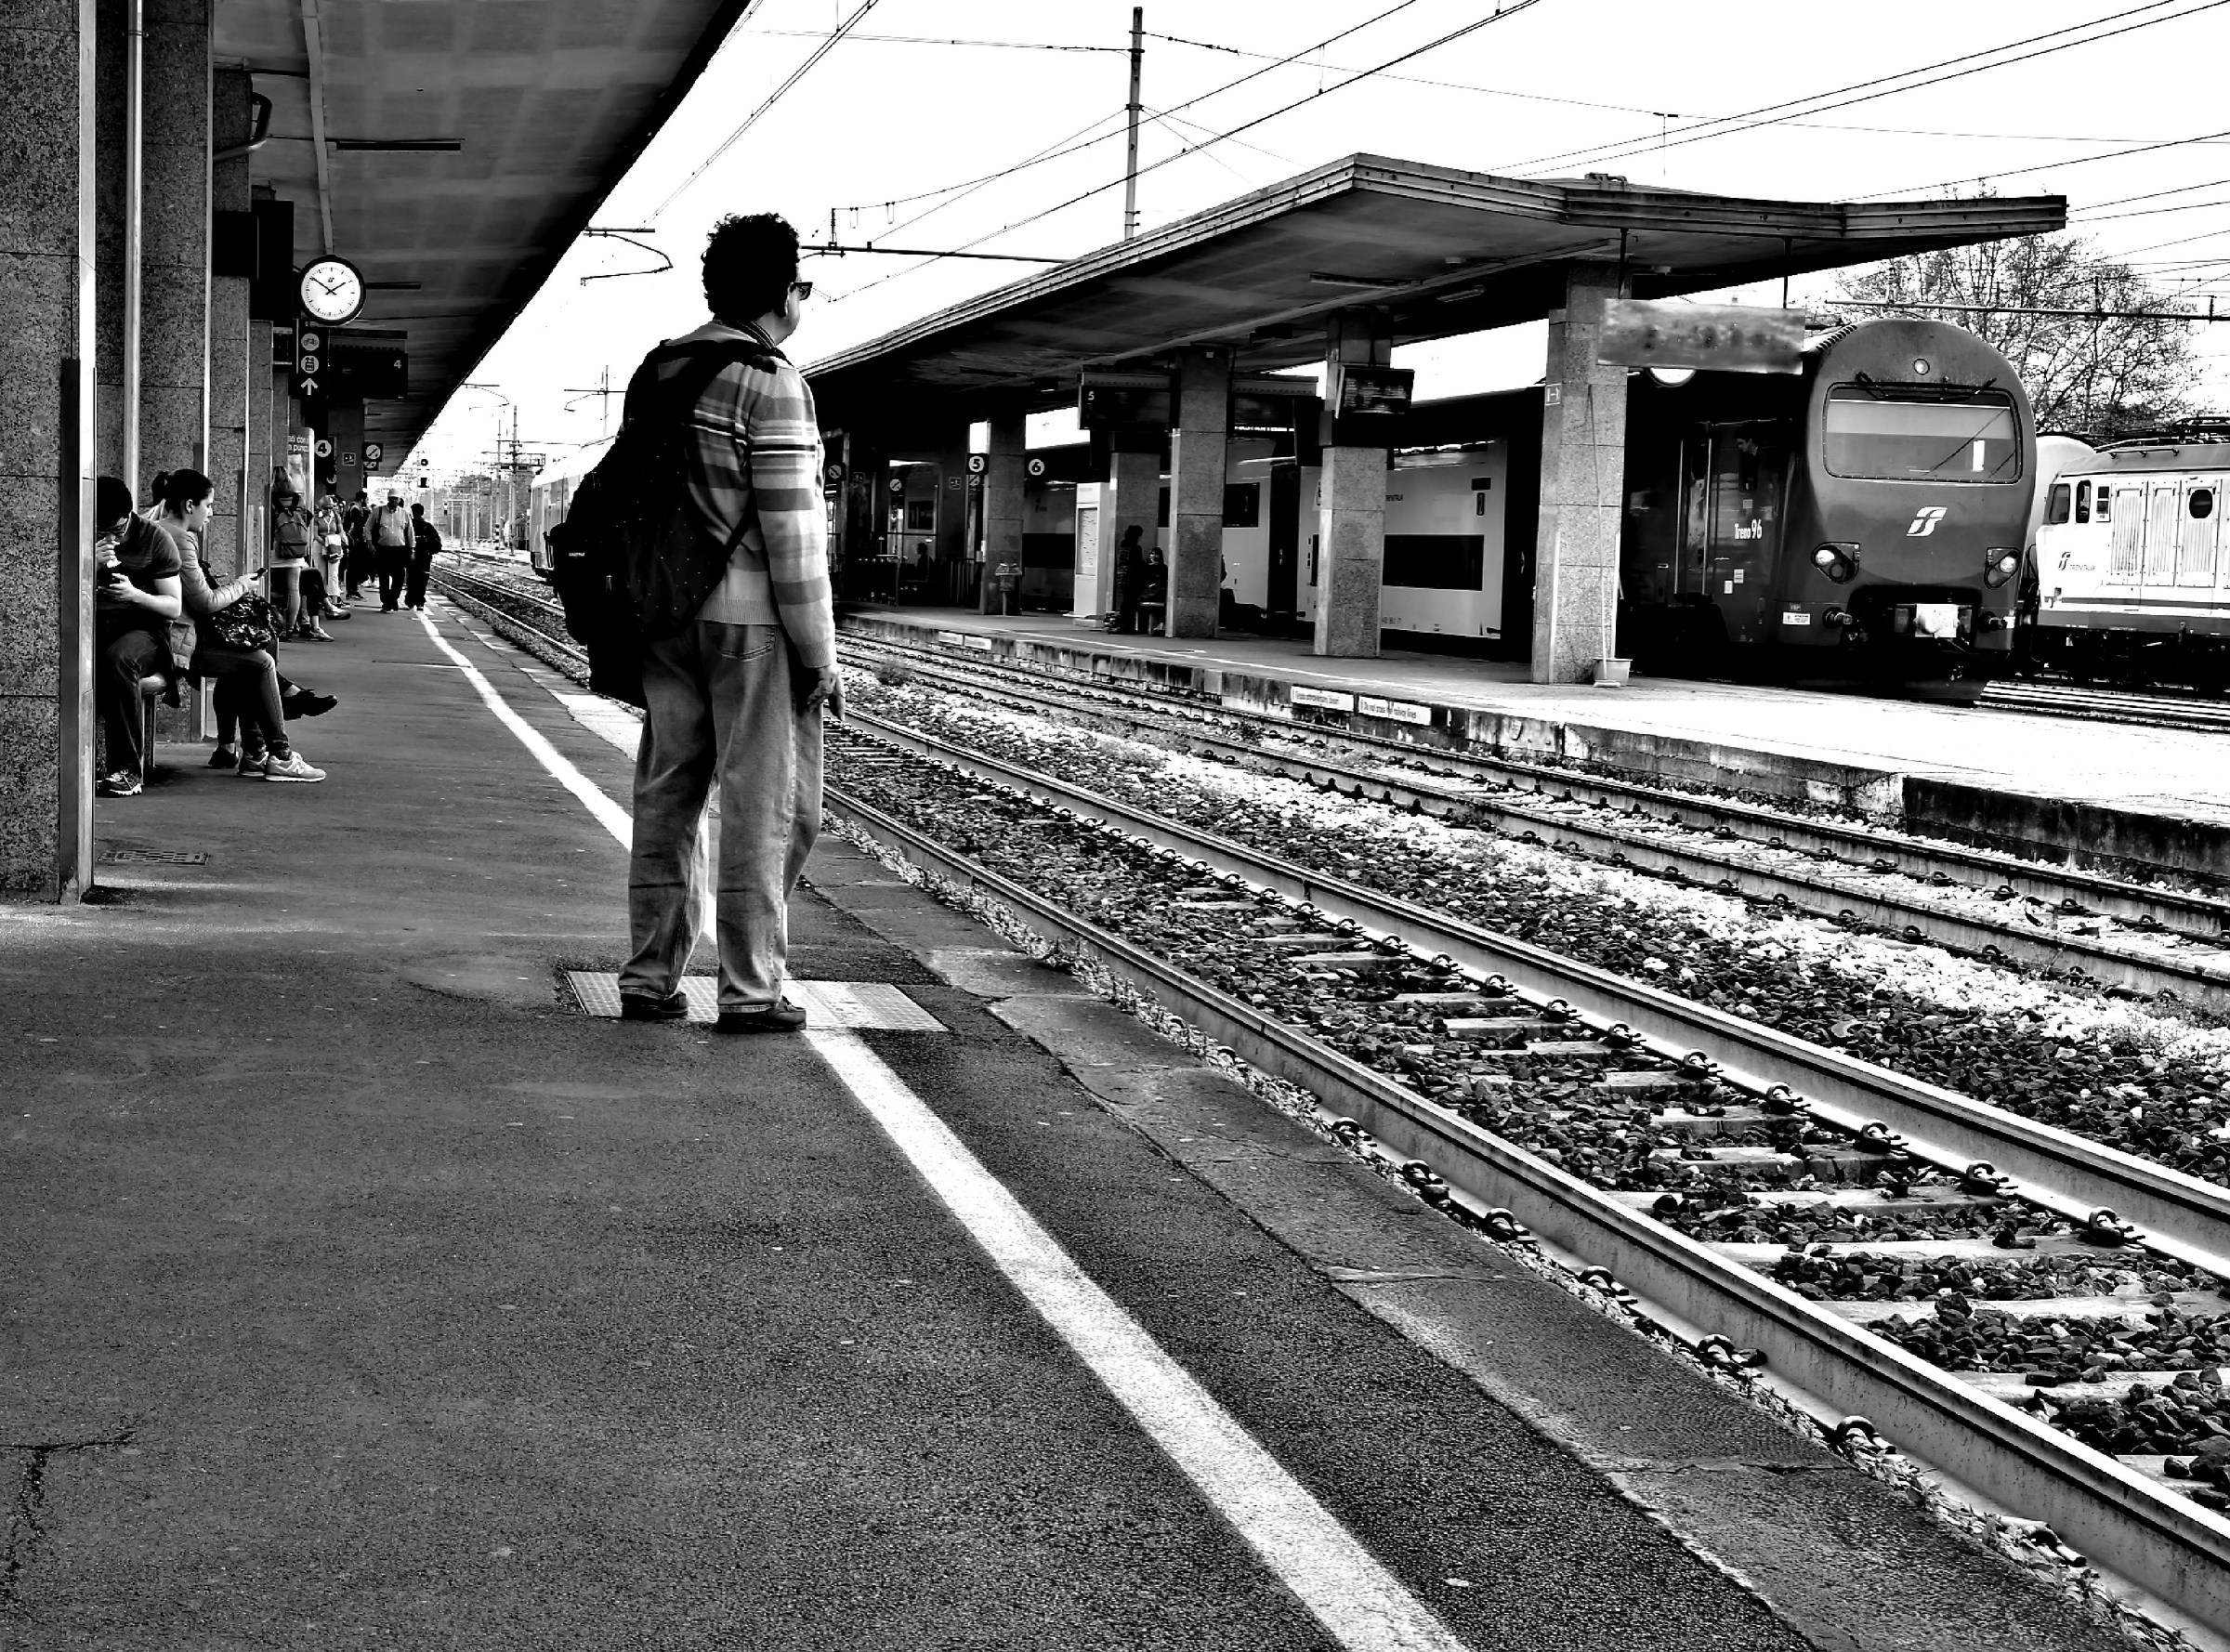 Waiting for the right train...